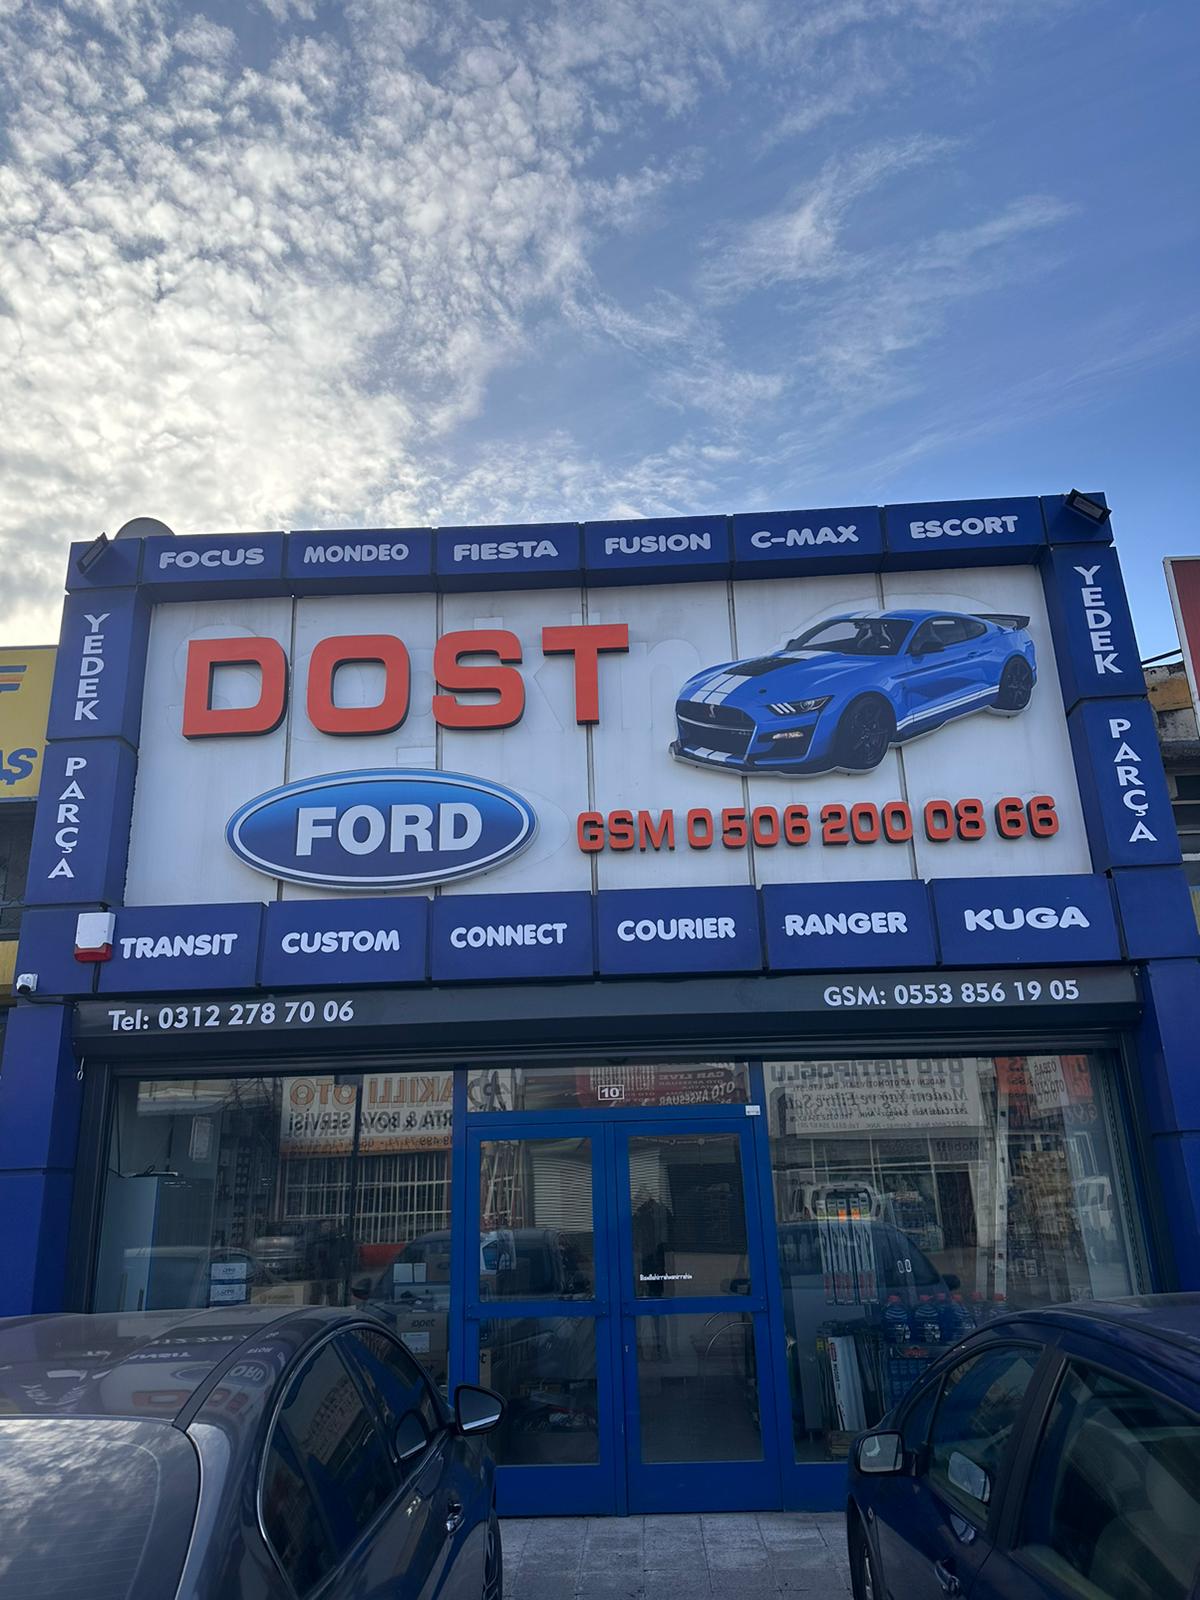 Dost Ford